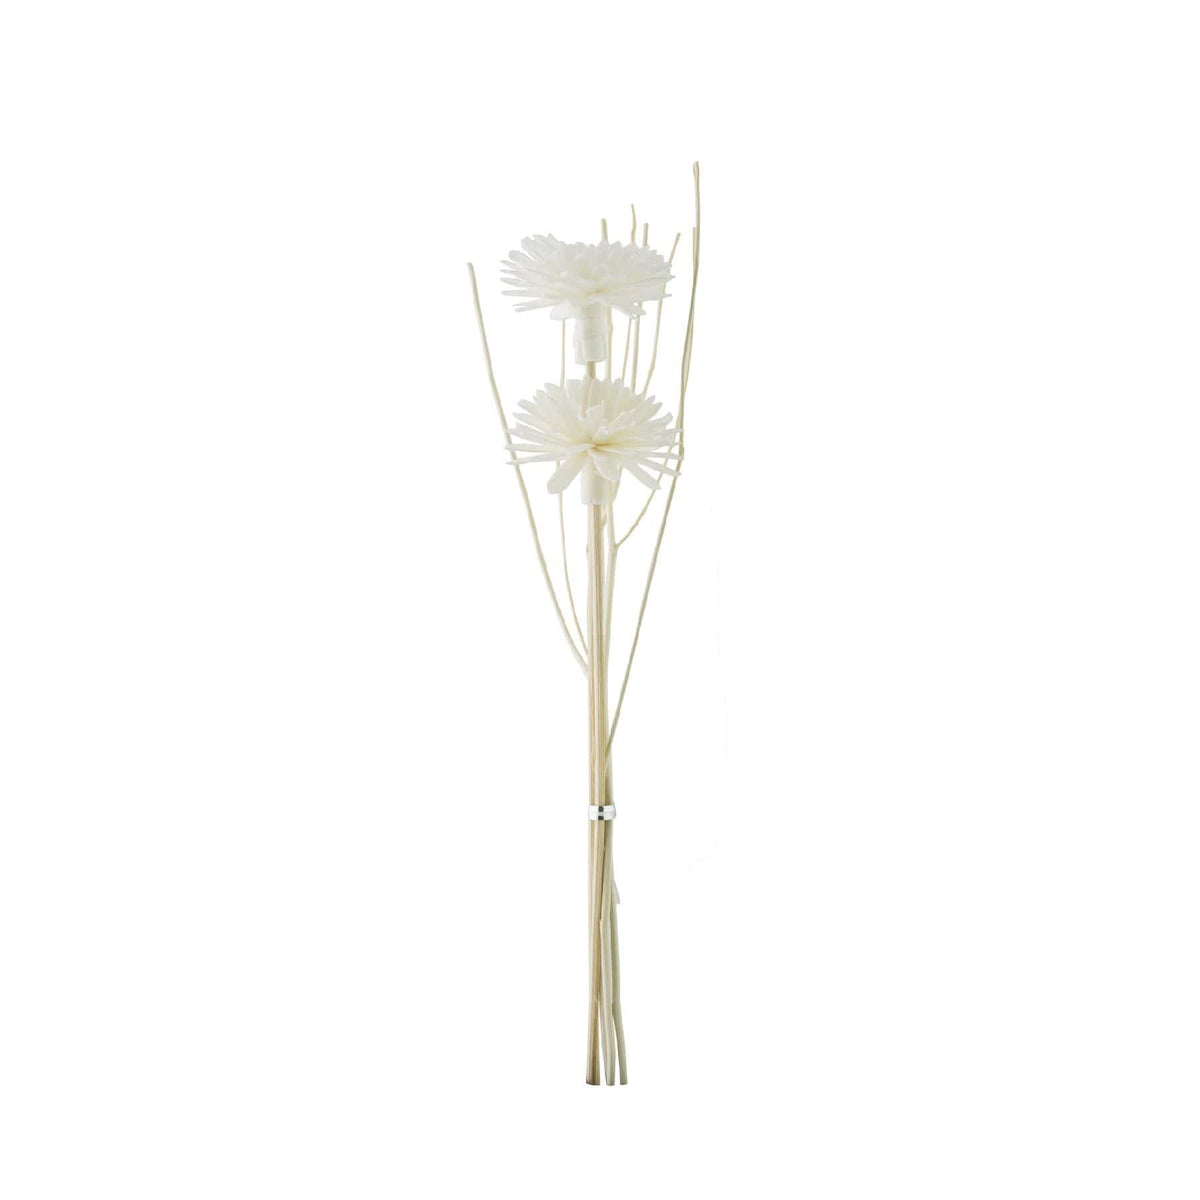 HYSSES Home Scents Solar Flower Diffuser Refill - Daisy Bouquet